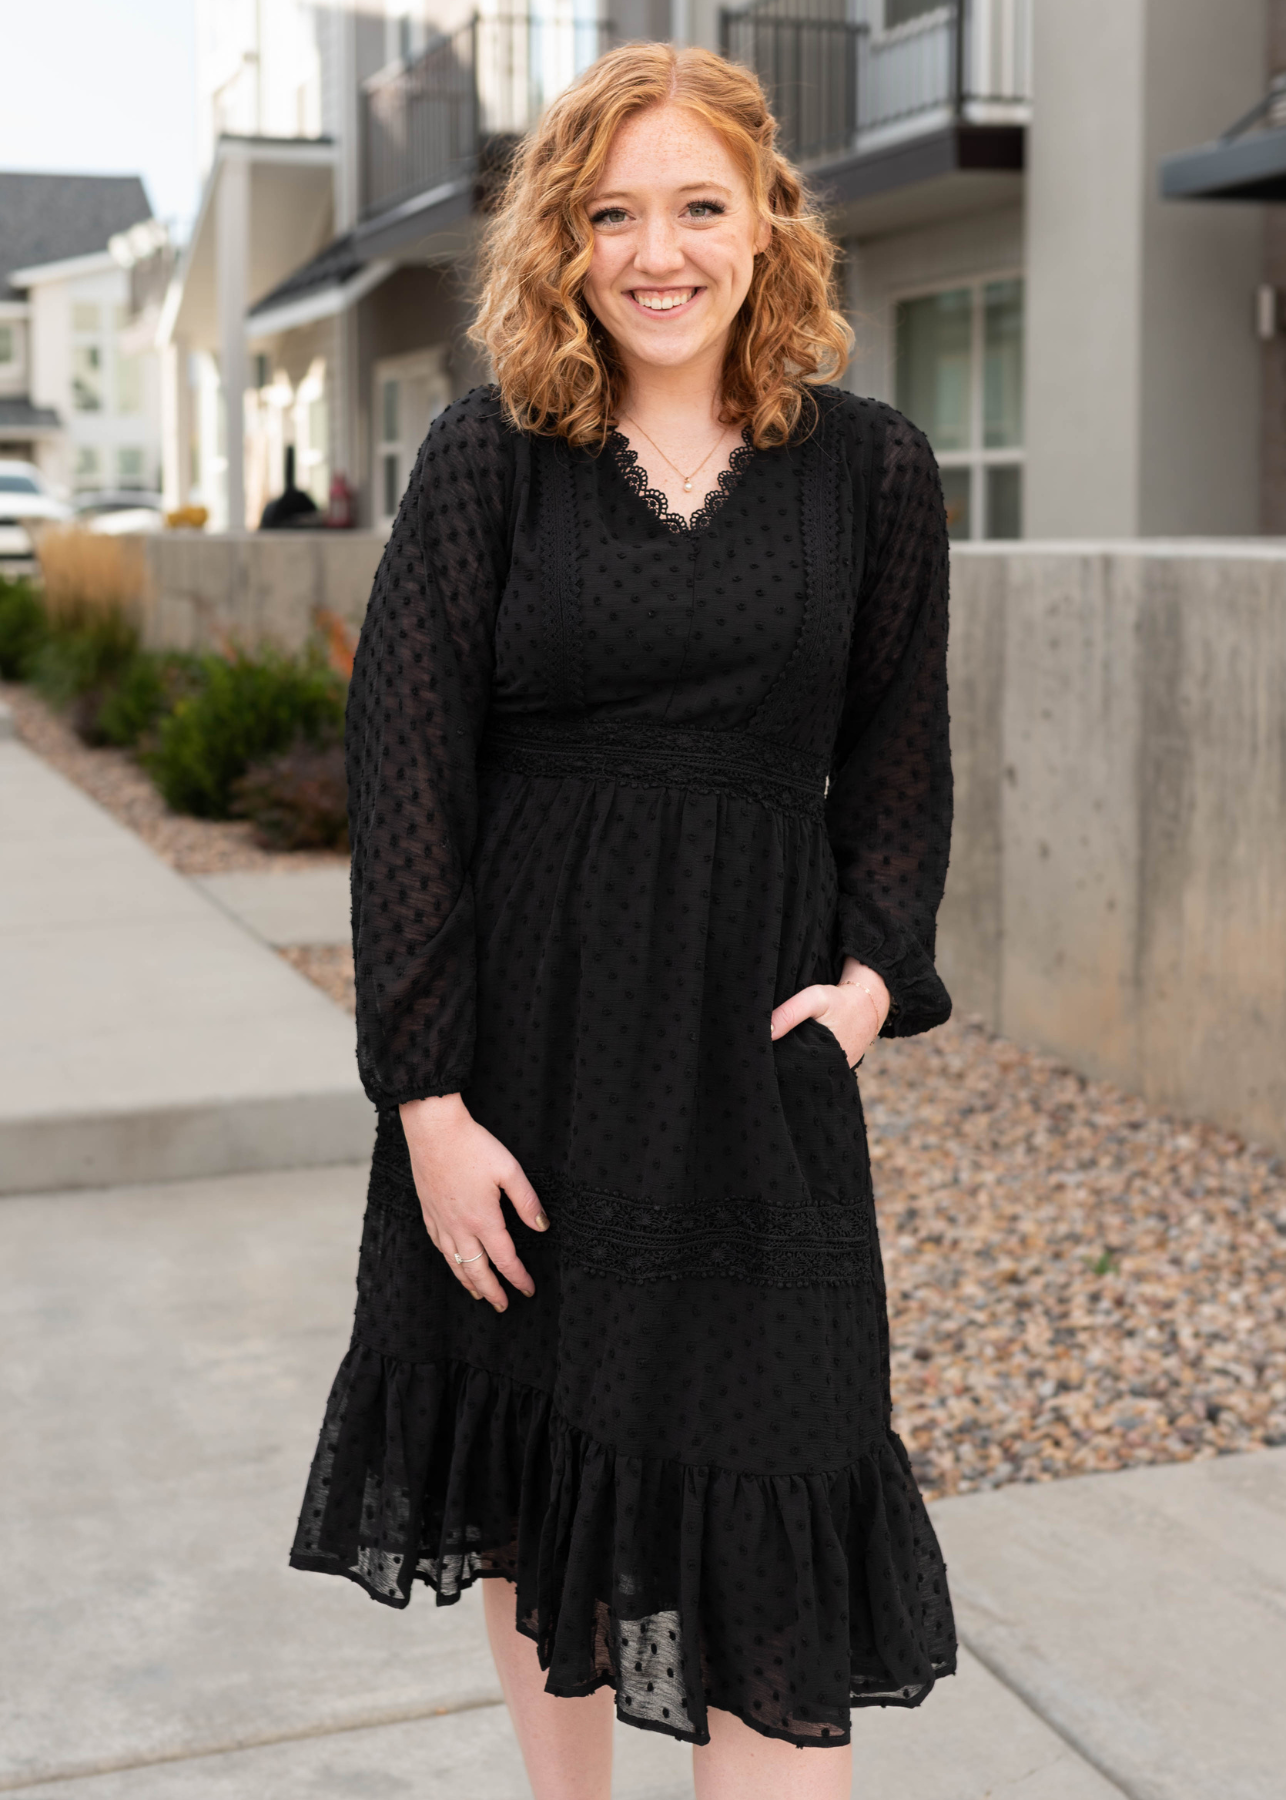 Long sleeve black textured dress with pockets